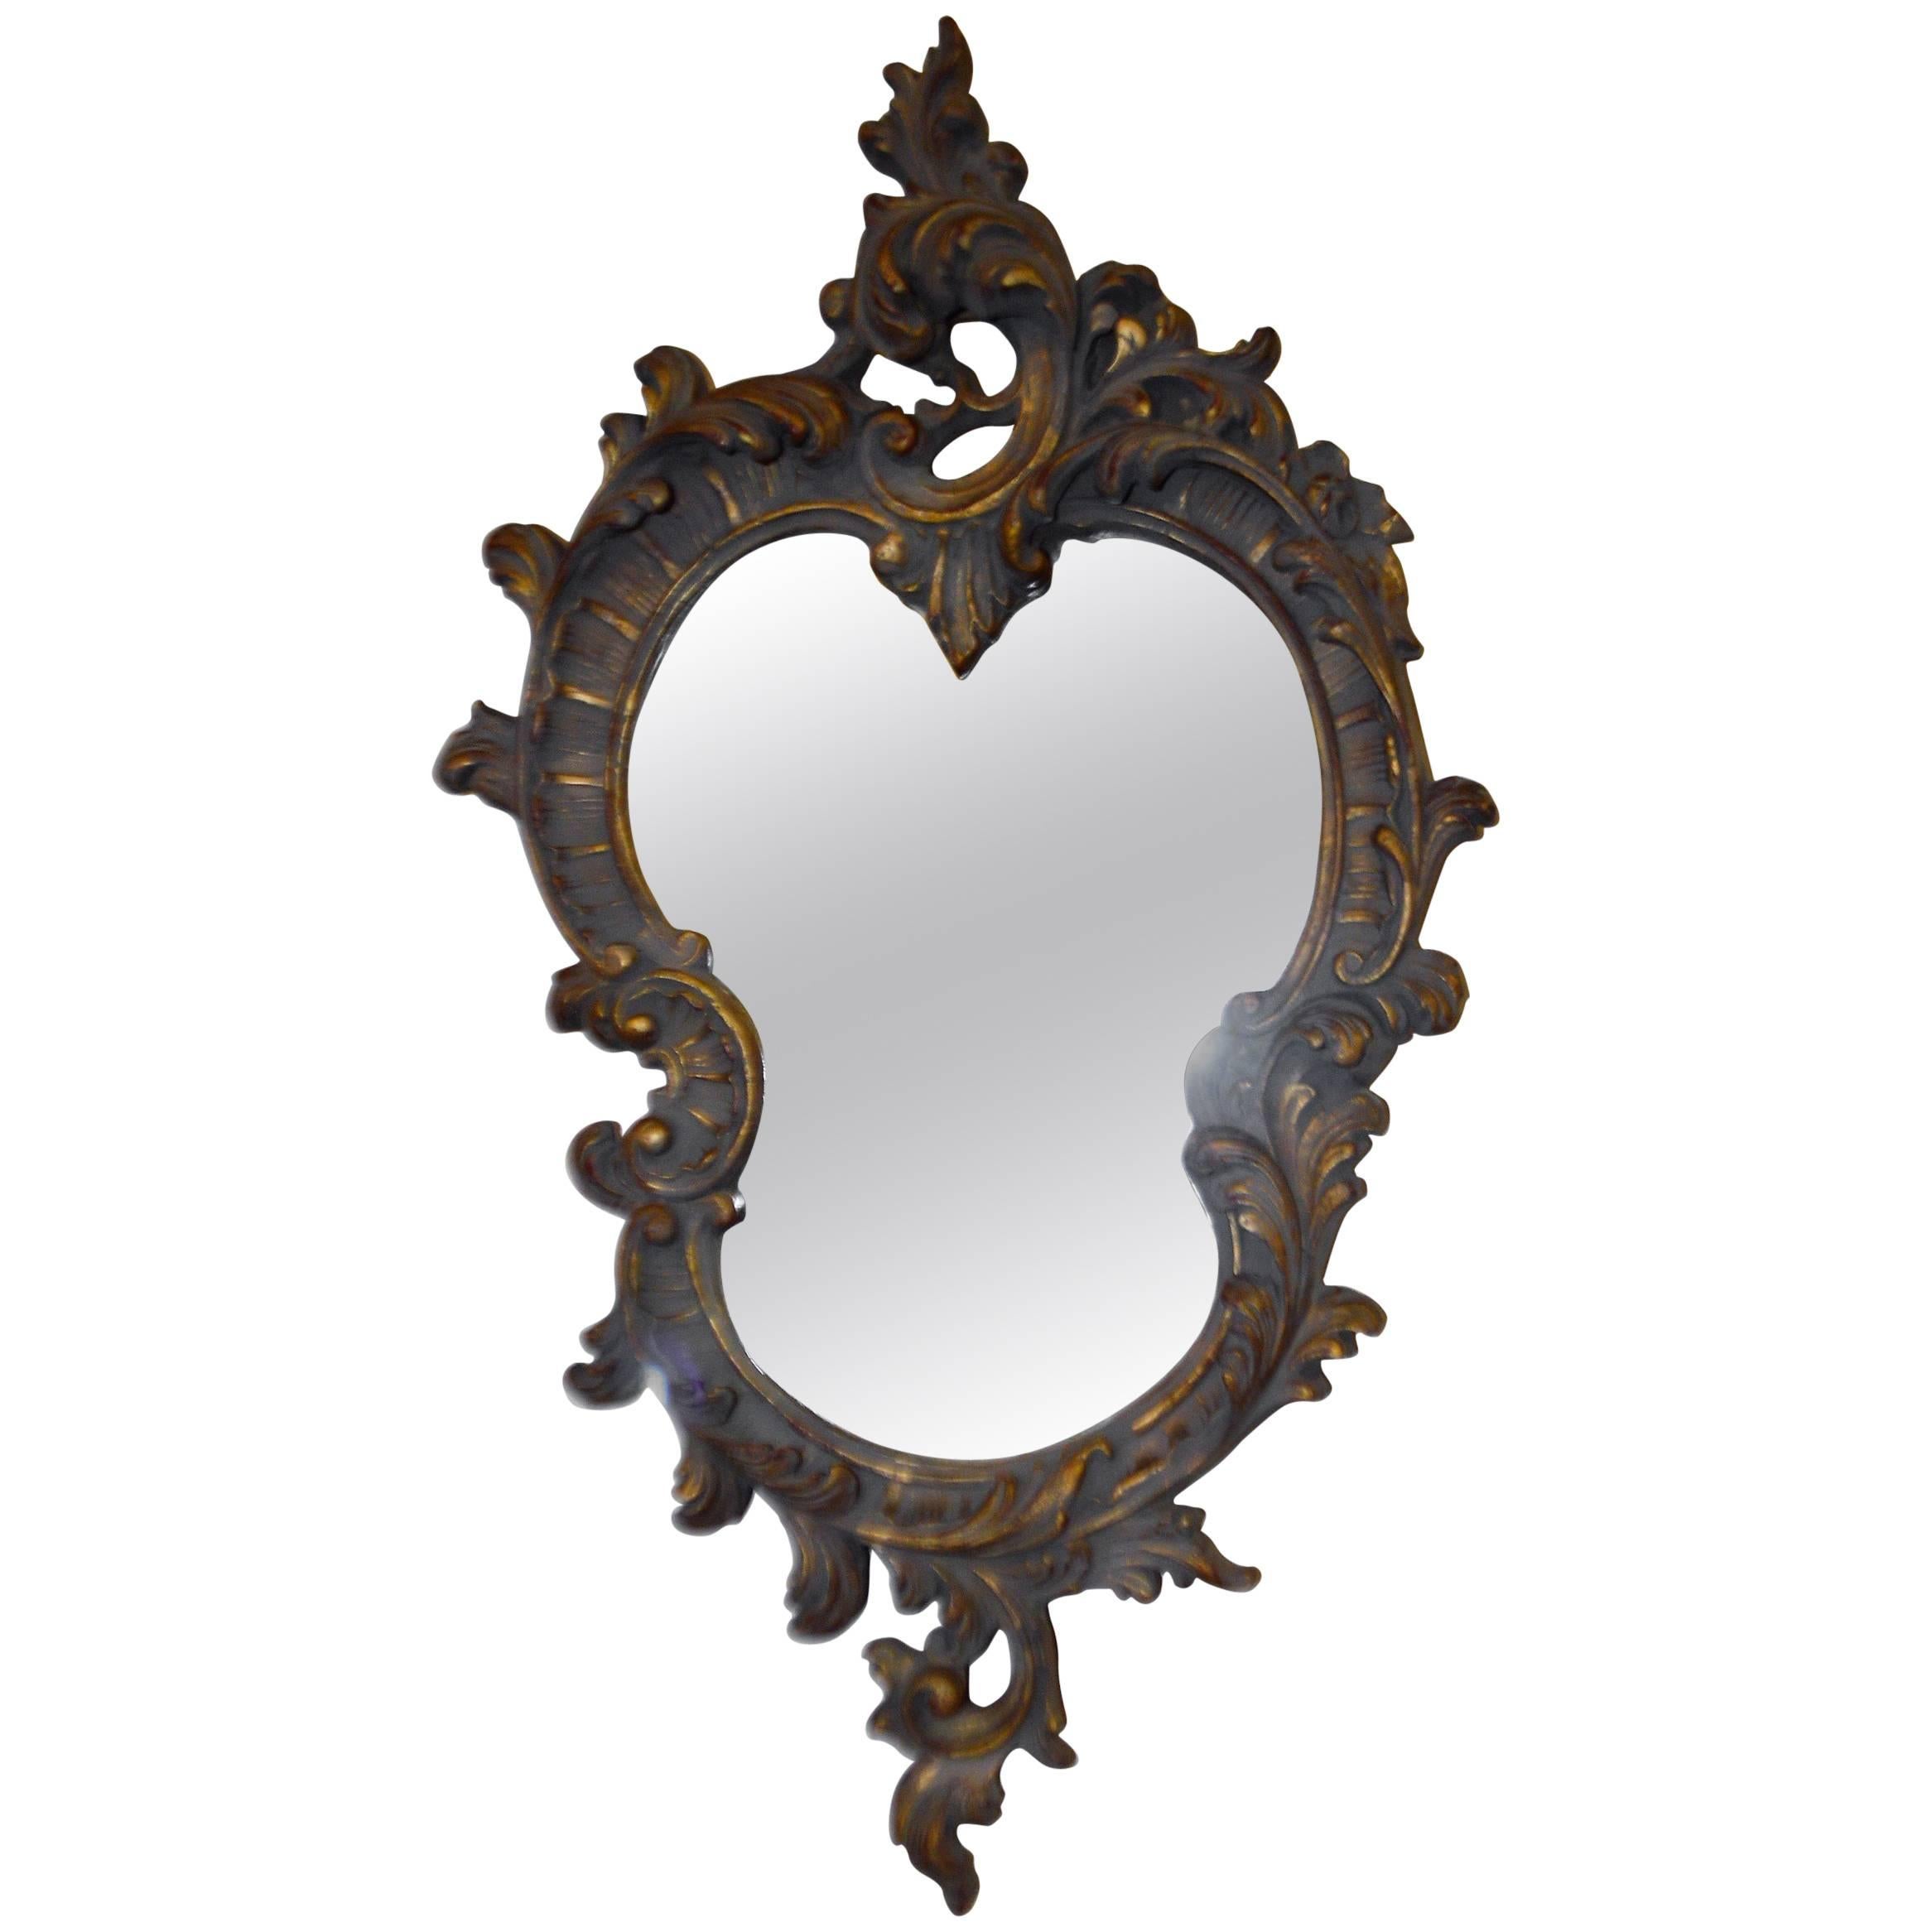 Rococo Style Hand-Carved Wooden Mirror with Gilded Details